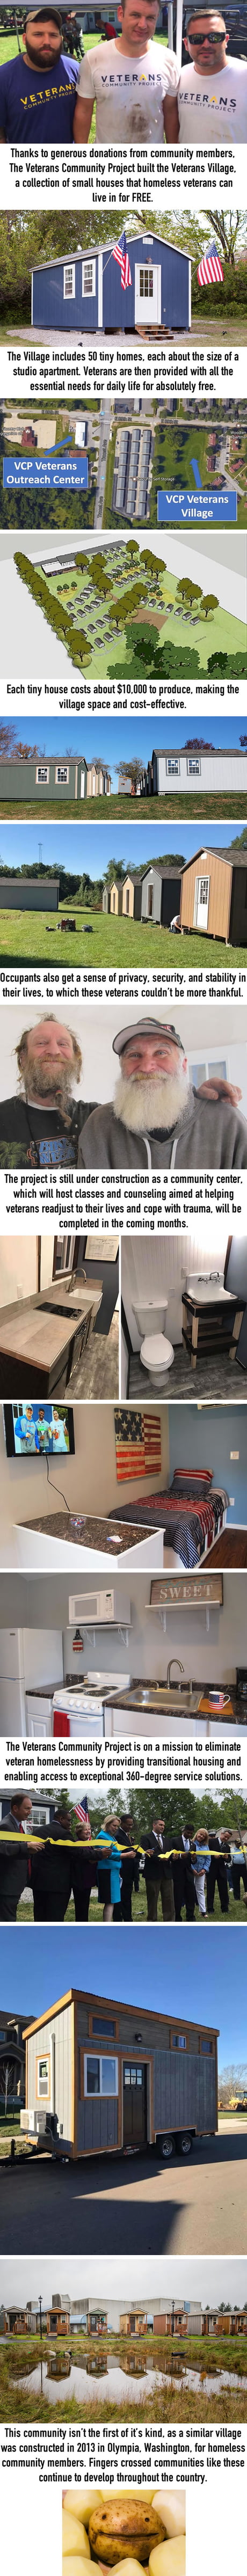 City Builds Tiny Village For Homeless Veterans With 50 Tiny Houses